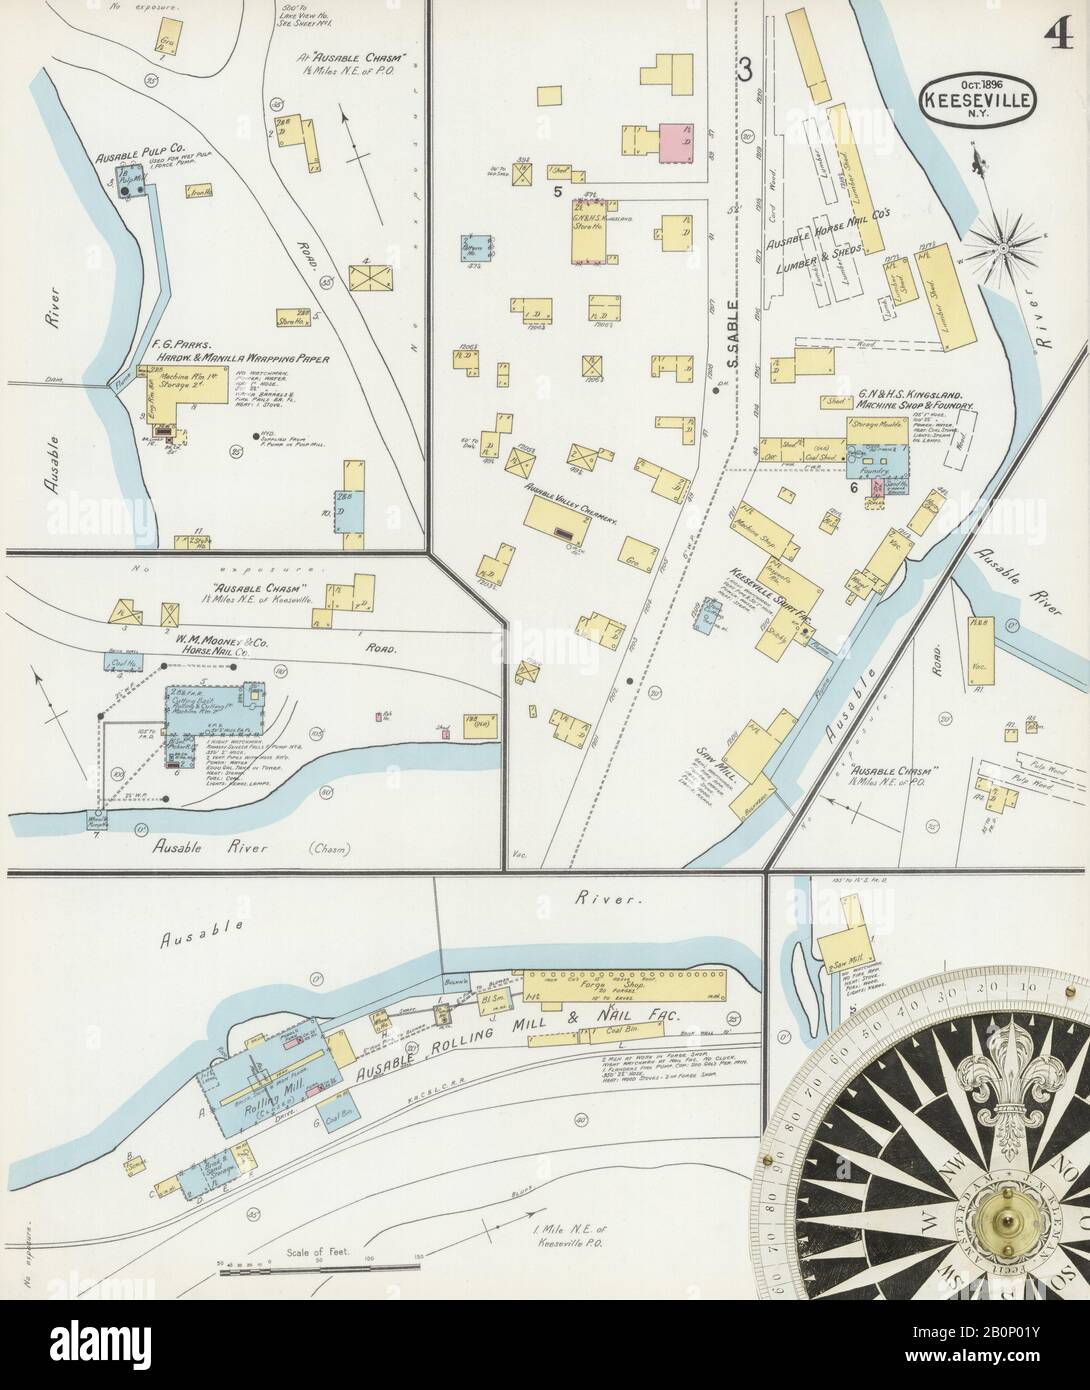 Image 4 of Sanborn Fire Insurance Map from Keeseville, Essex County, New York. Oct 1896. 4 Sheet(s), America, street map with a Nineteenth Century compass Stock Photo